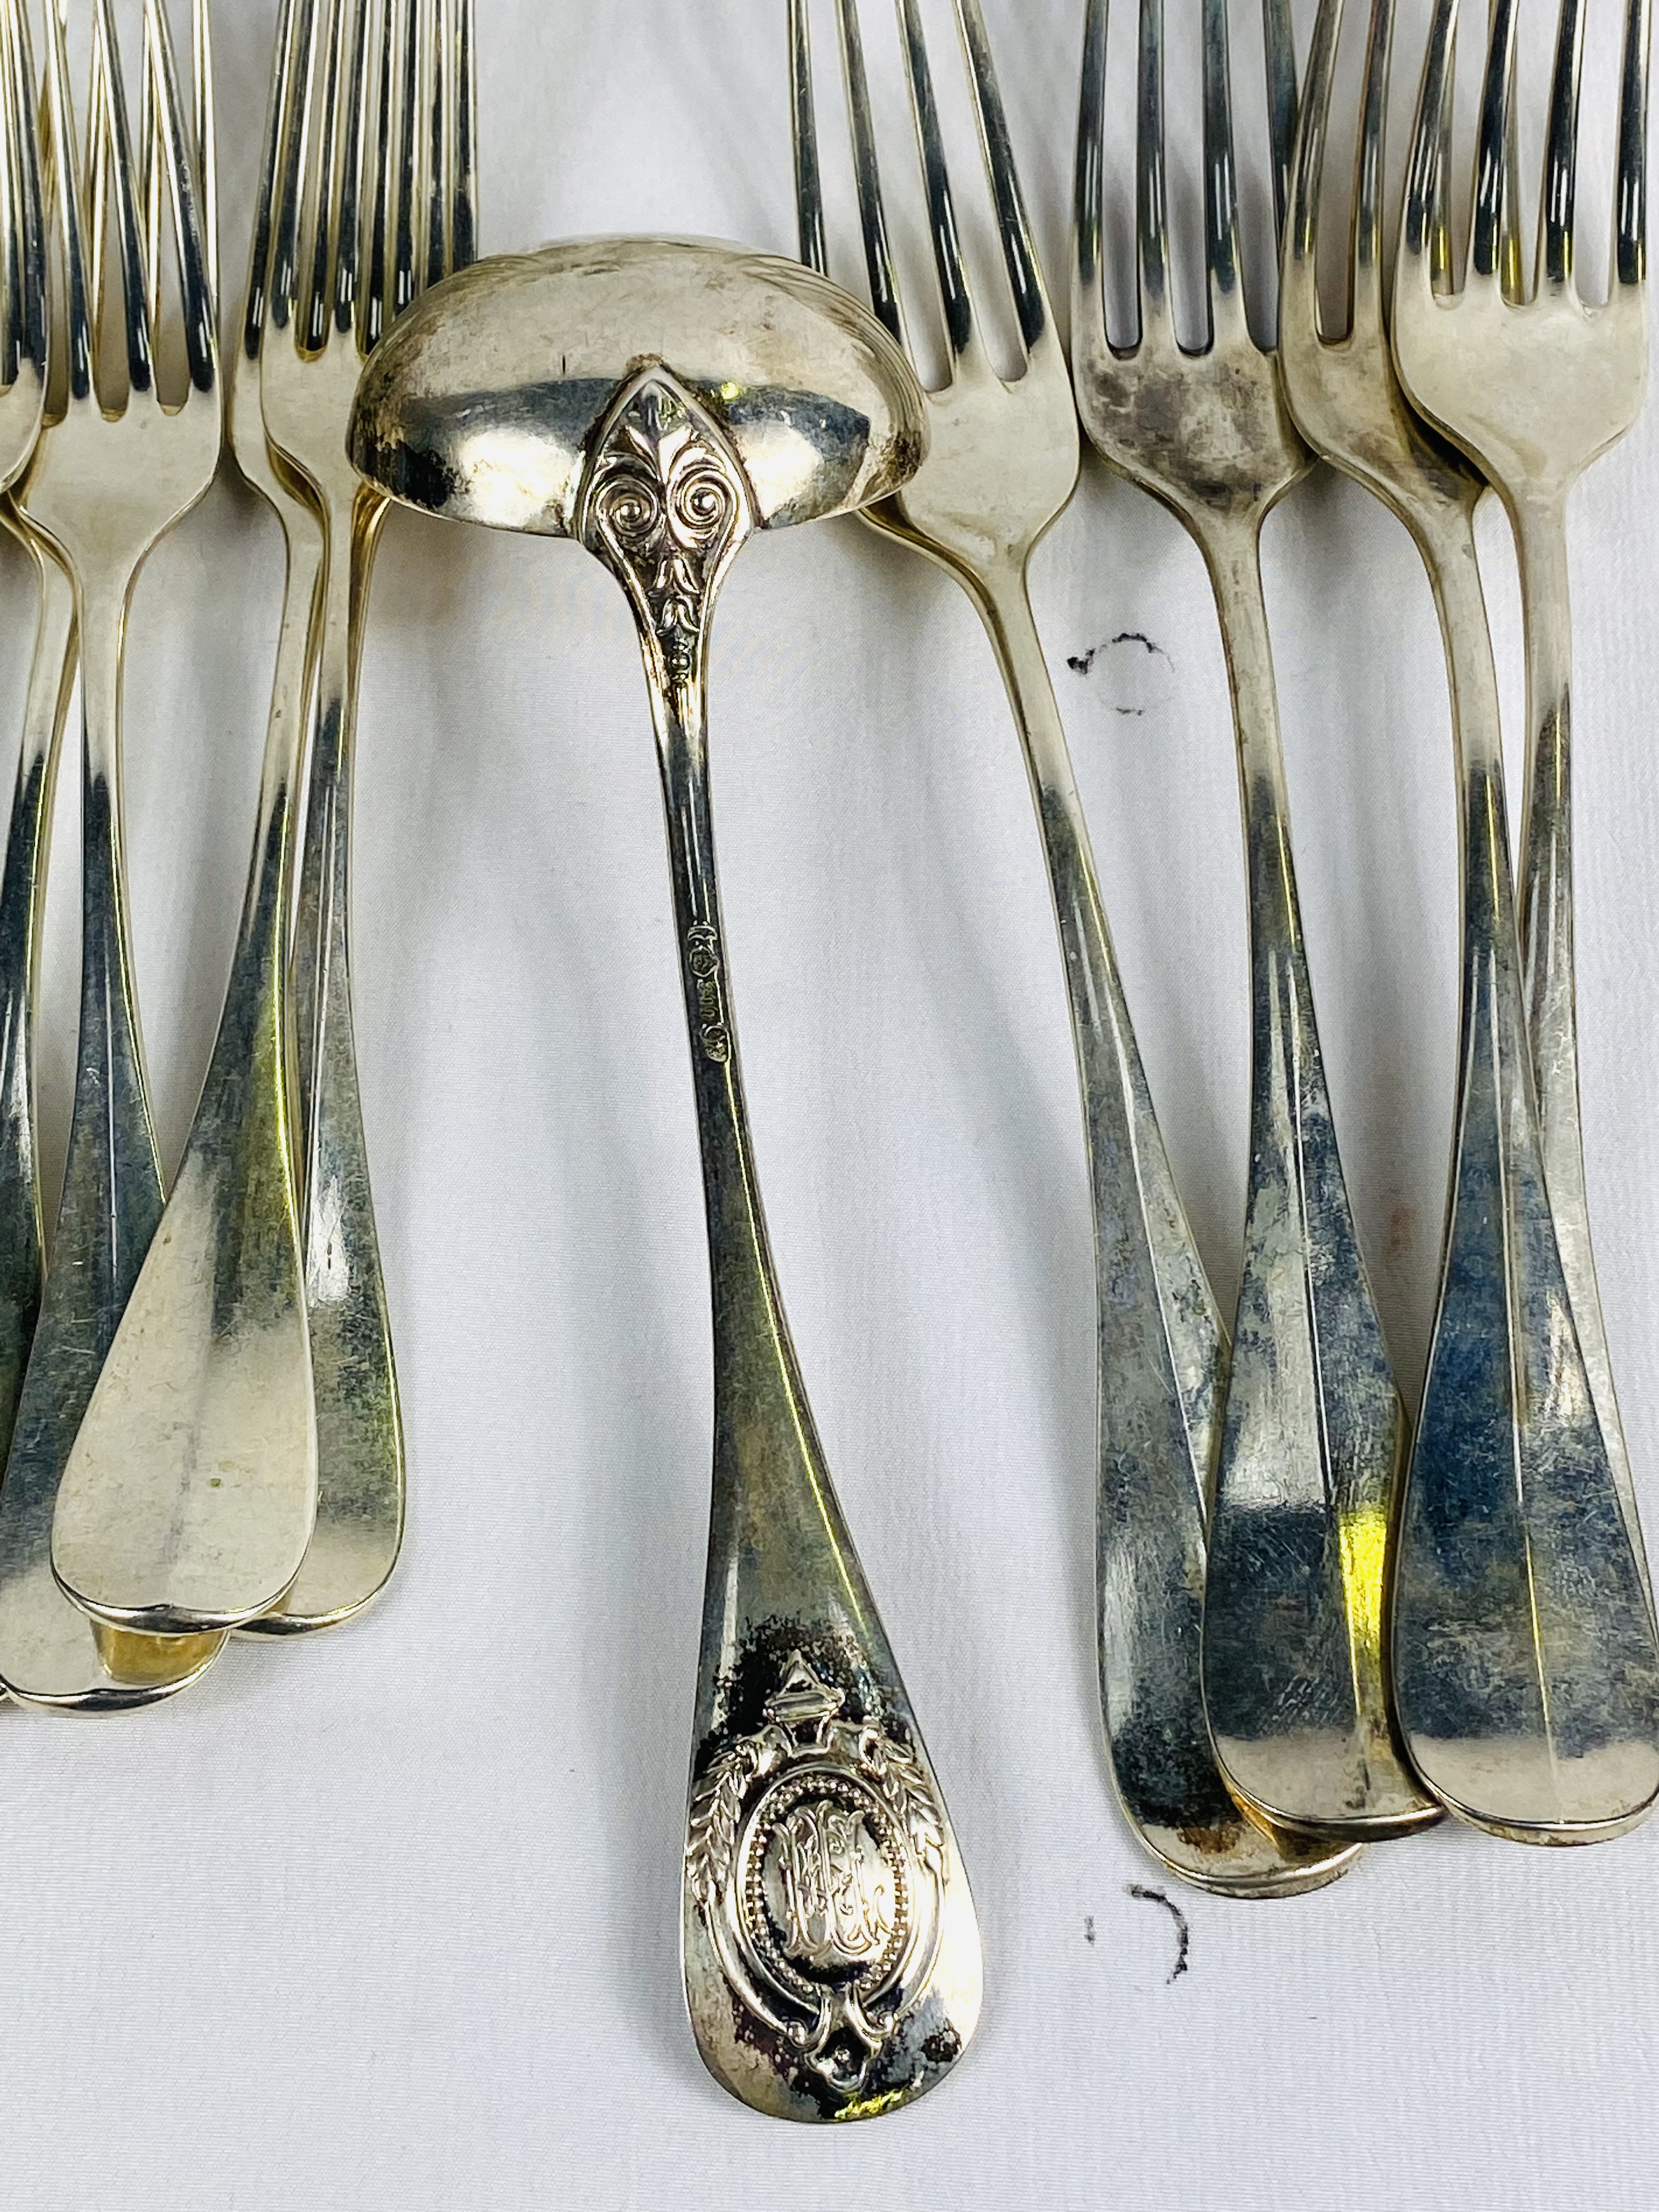 Part set of German 800 silver cutlery, 2488g (80ozt) - Image 4 of 8